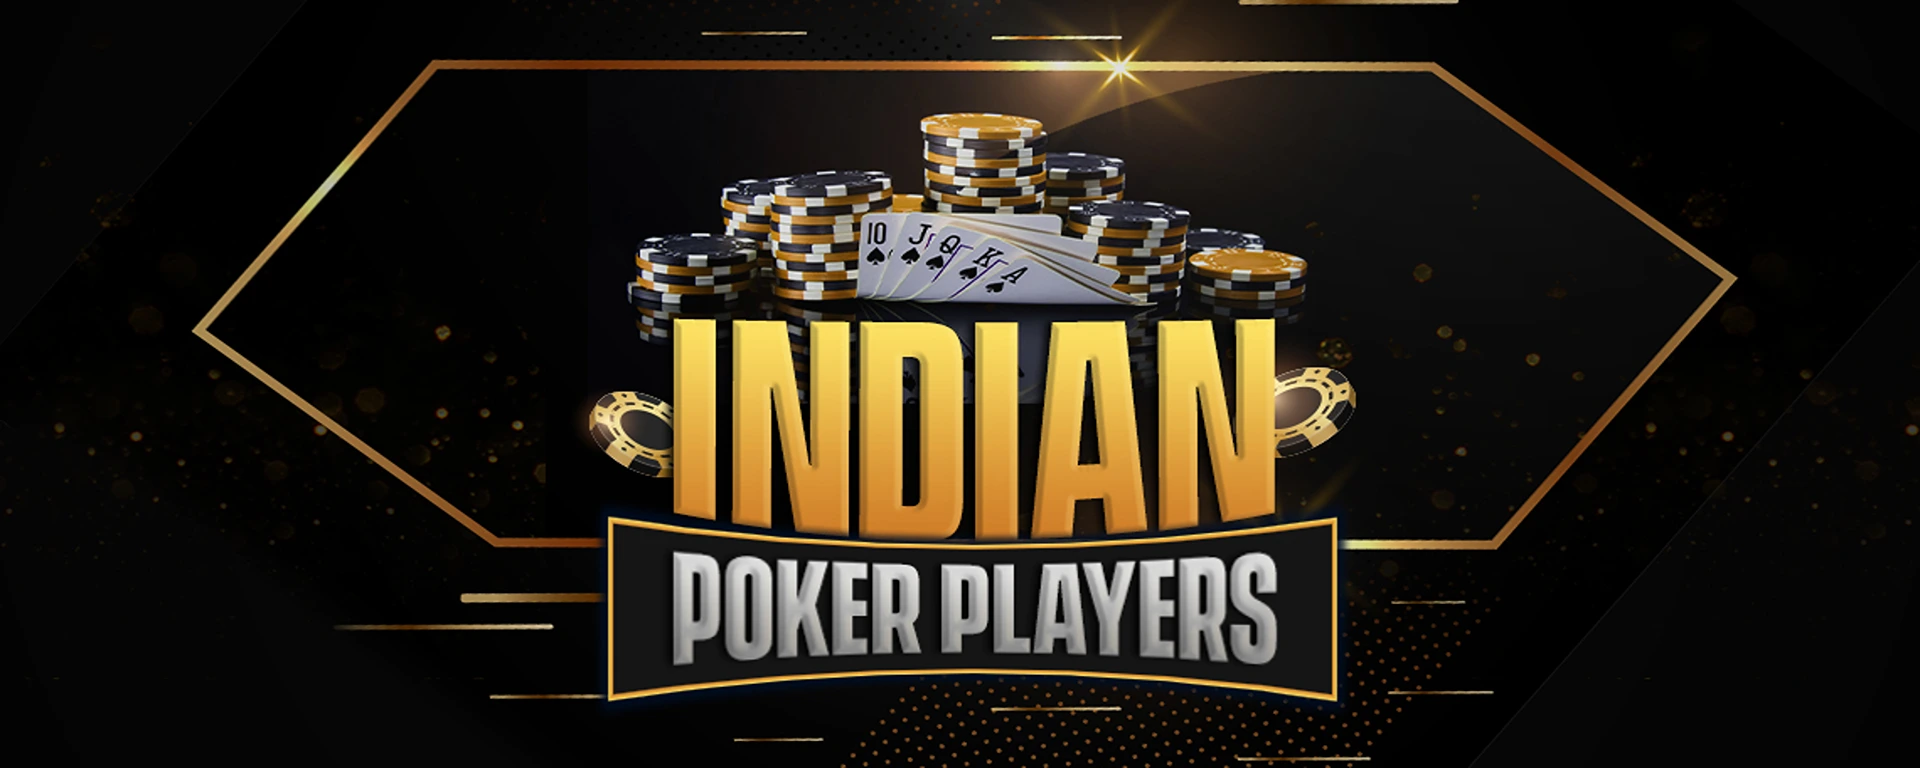 Best Indian Poker Players